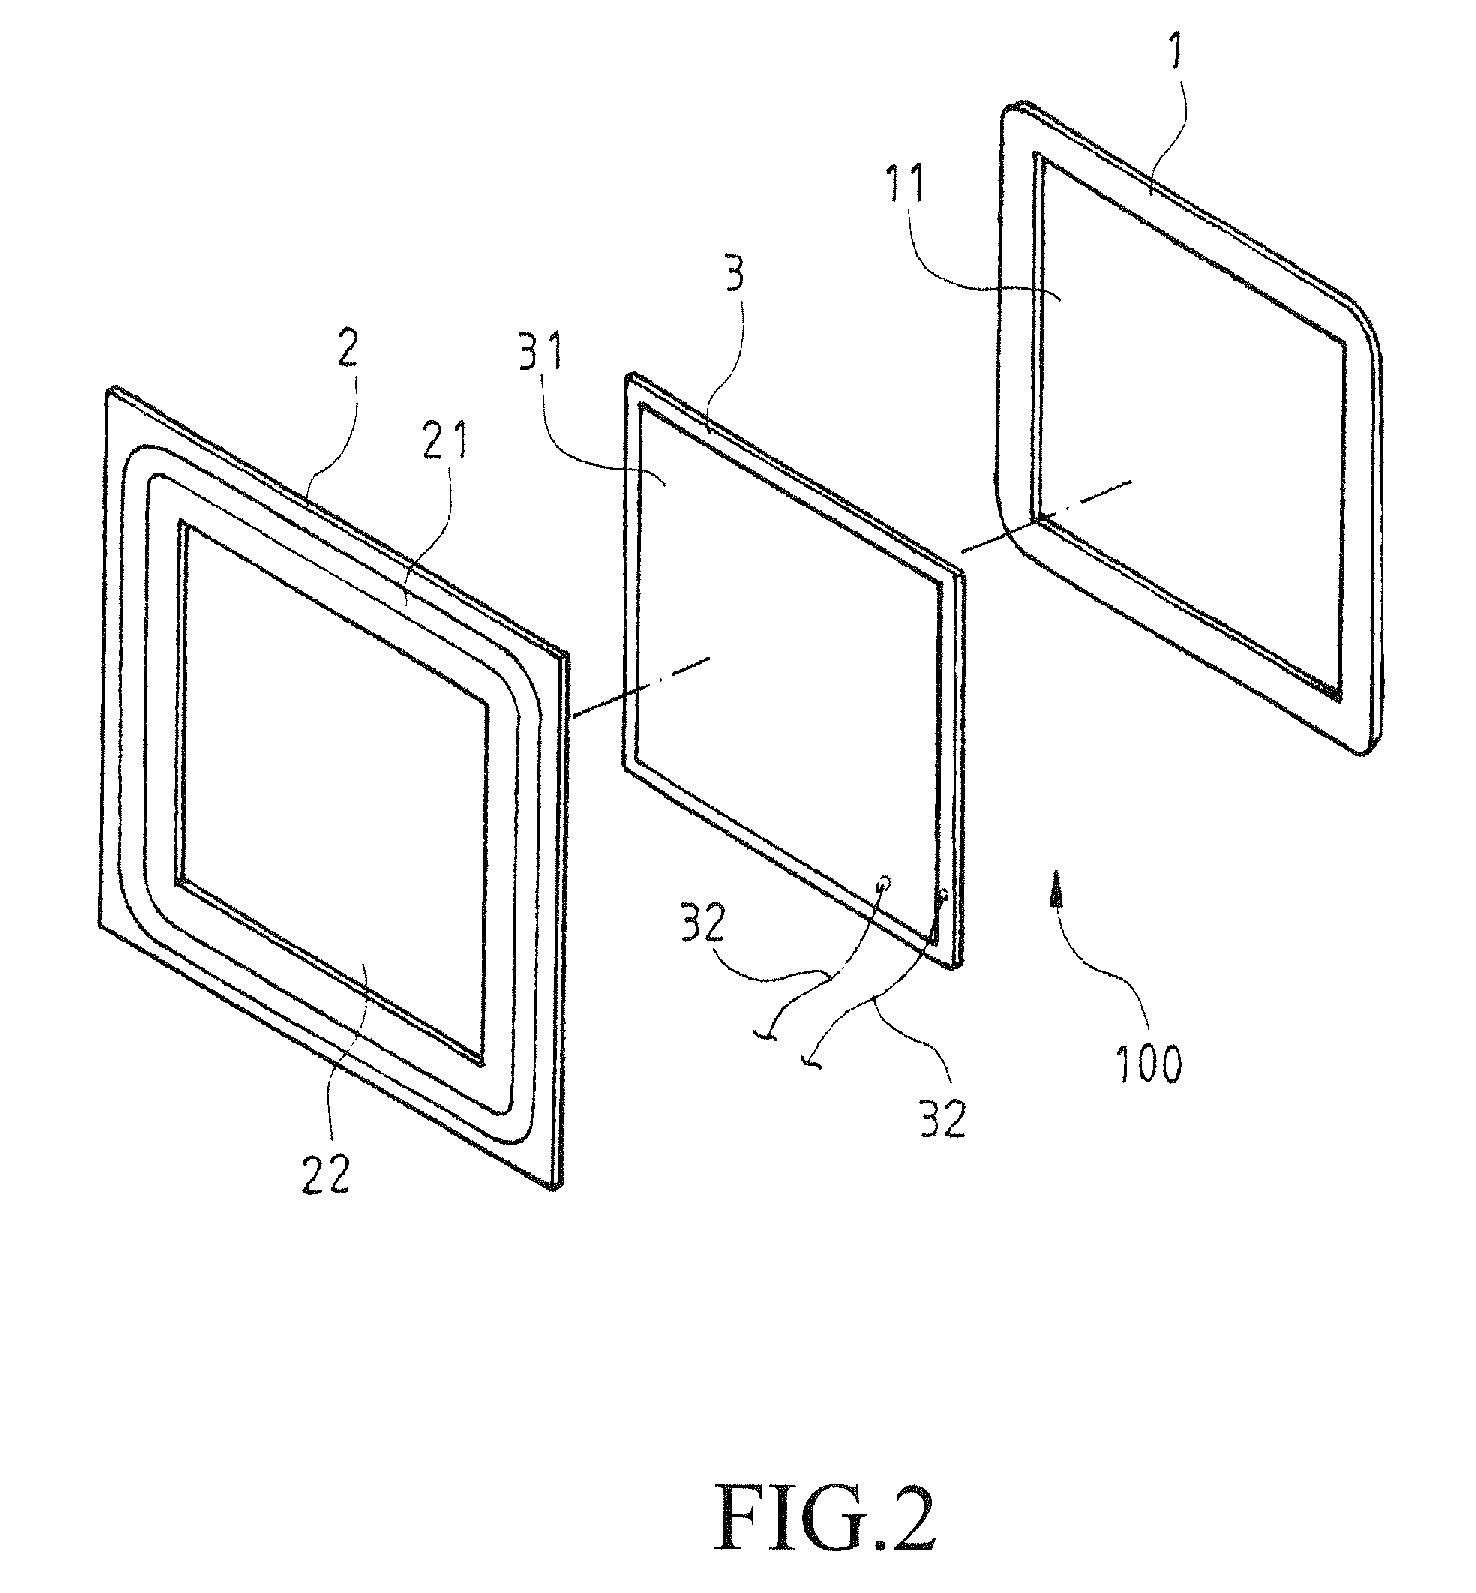 Ultra-thin loudspeaker structure